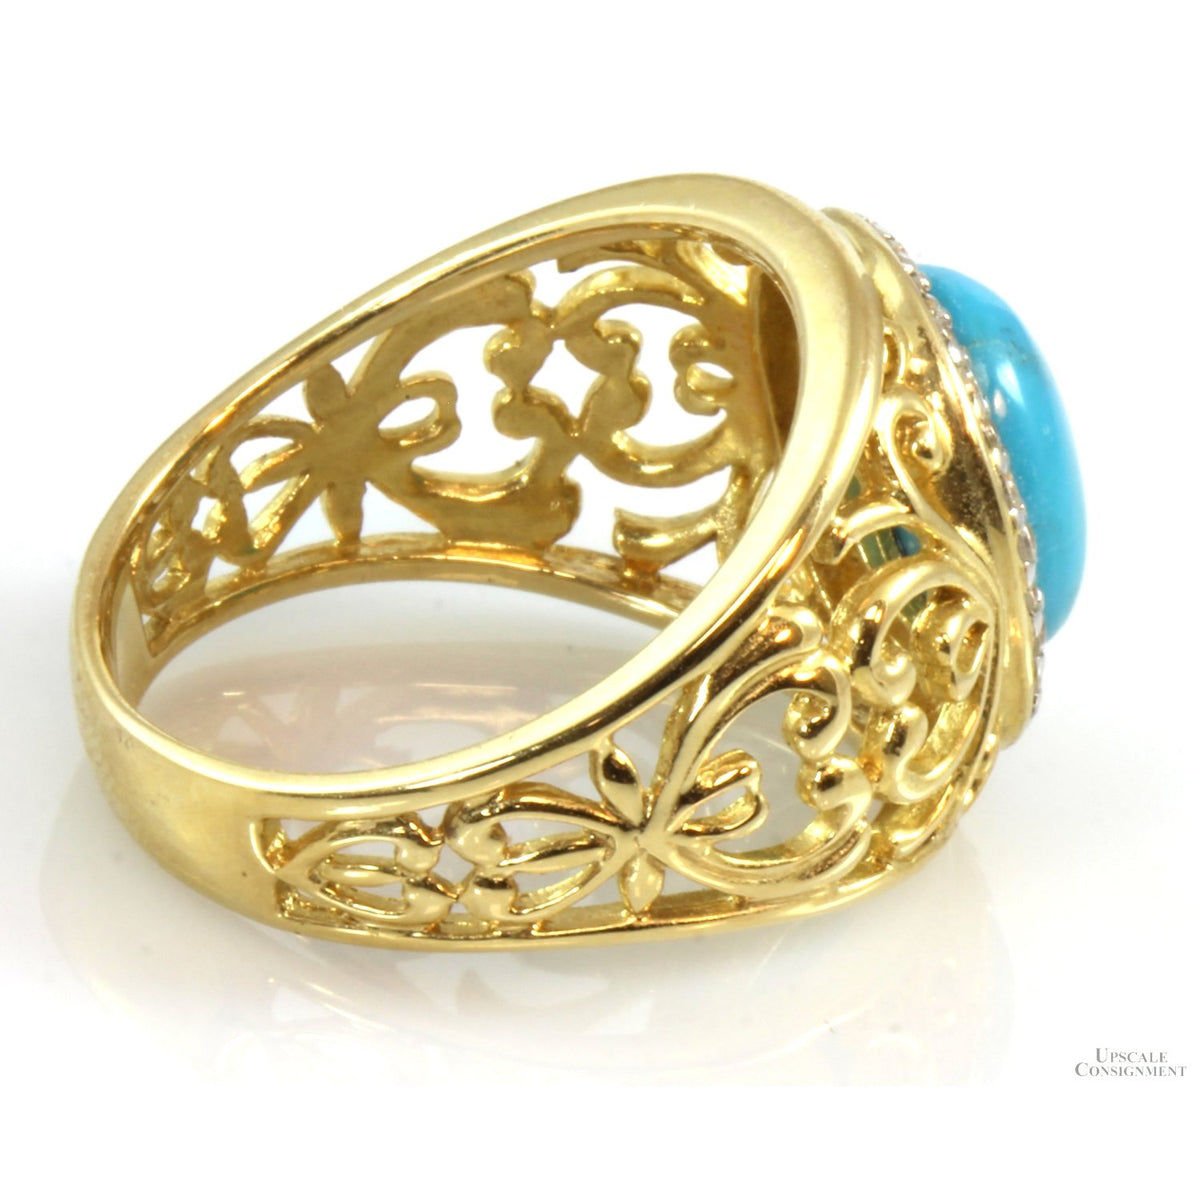 Gold Vermeil over Sterling Turquoise Dome Style Ring